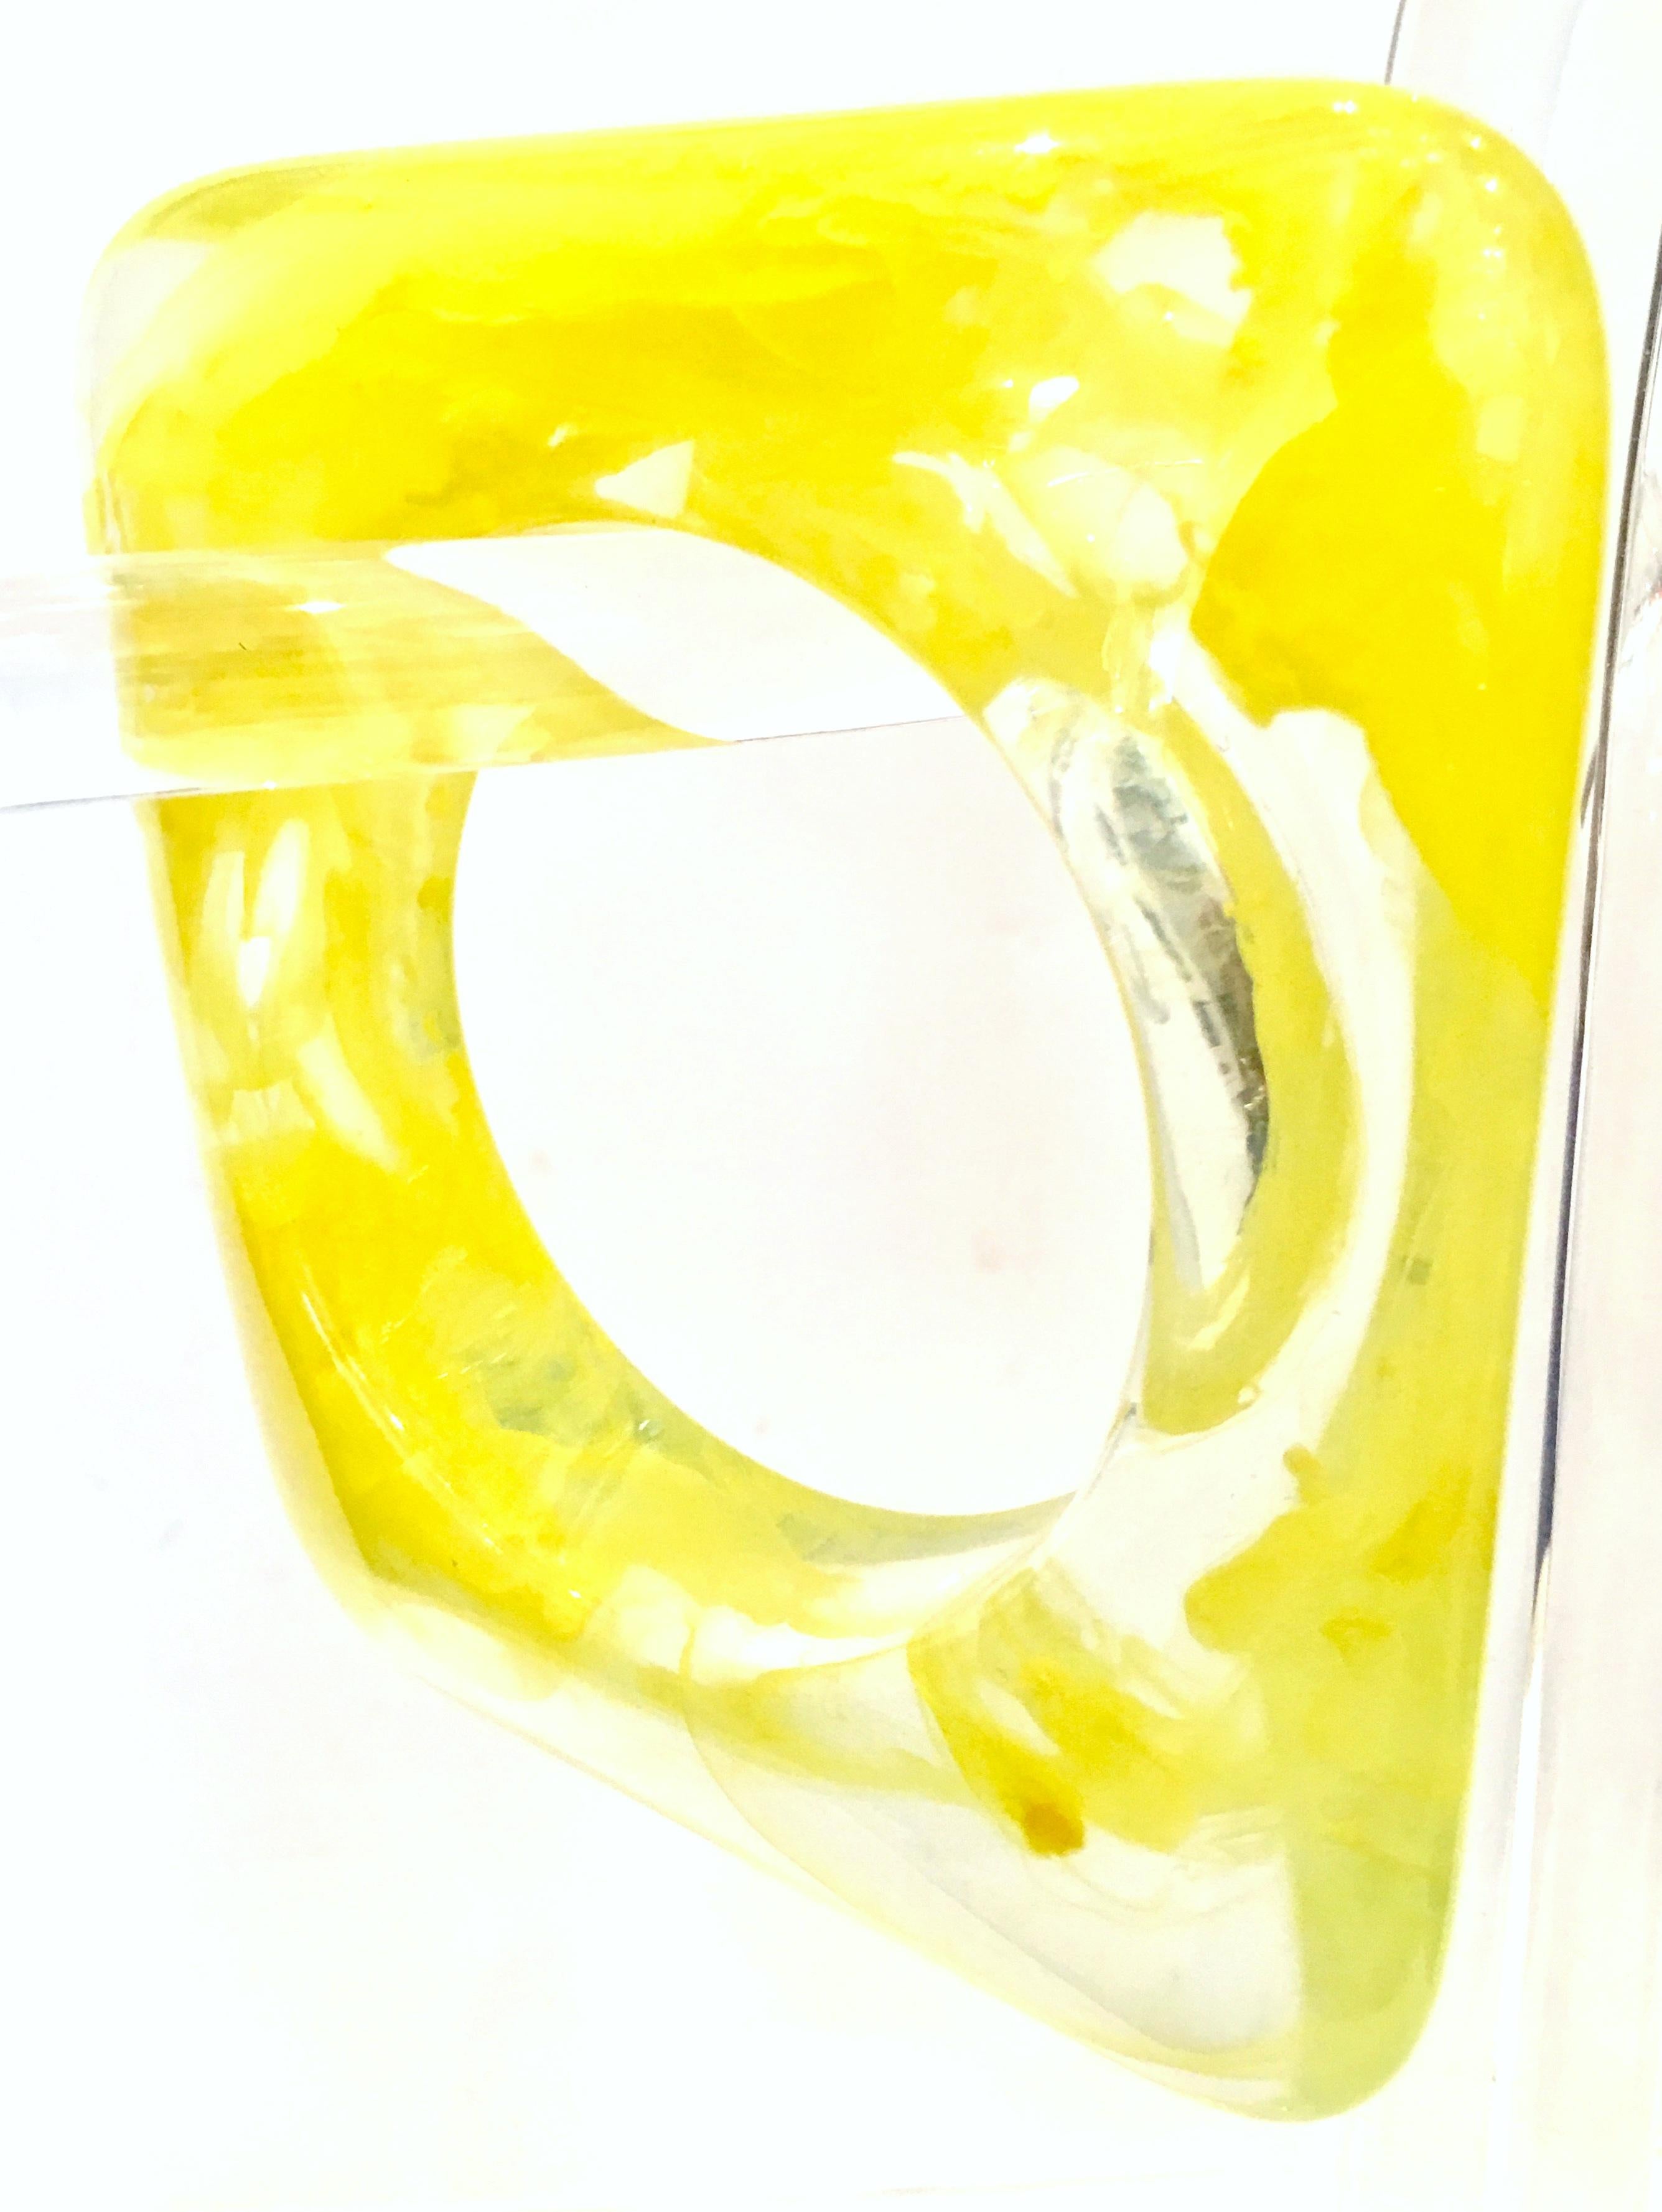 Lucite Organic Form Circle In A Square Bangle Bracelet In Good Condition For Sale In West Palm Beach, FL